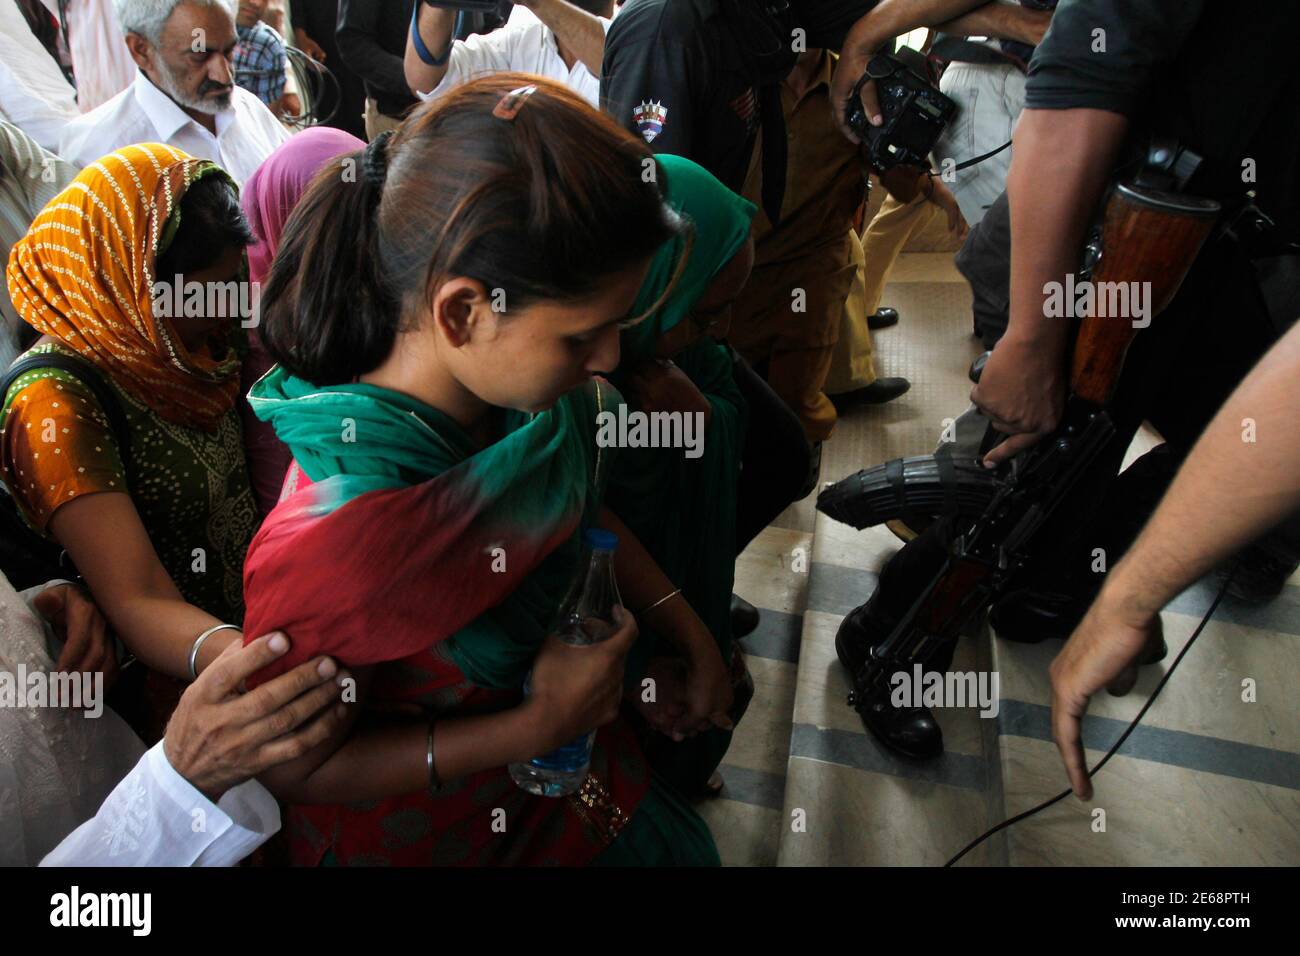 Pakistani security officials escort Poonam (C), a daughter of Sarabjit  Singh, who was convicted of spying for India and sentenced to death in  Pakistan, as she arrives with her family members at